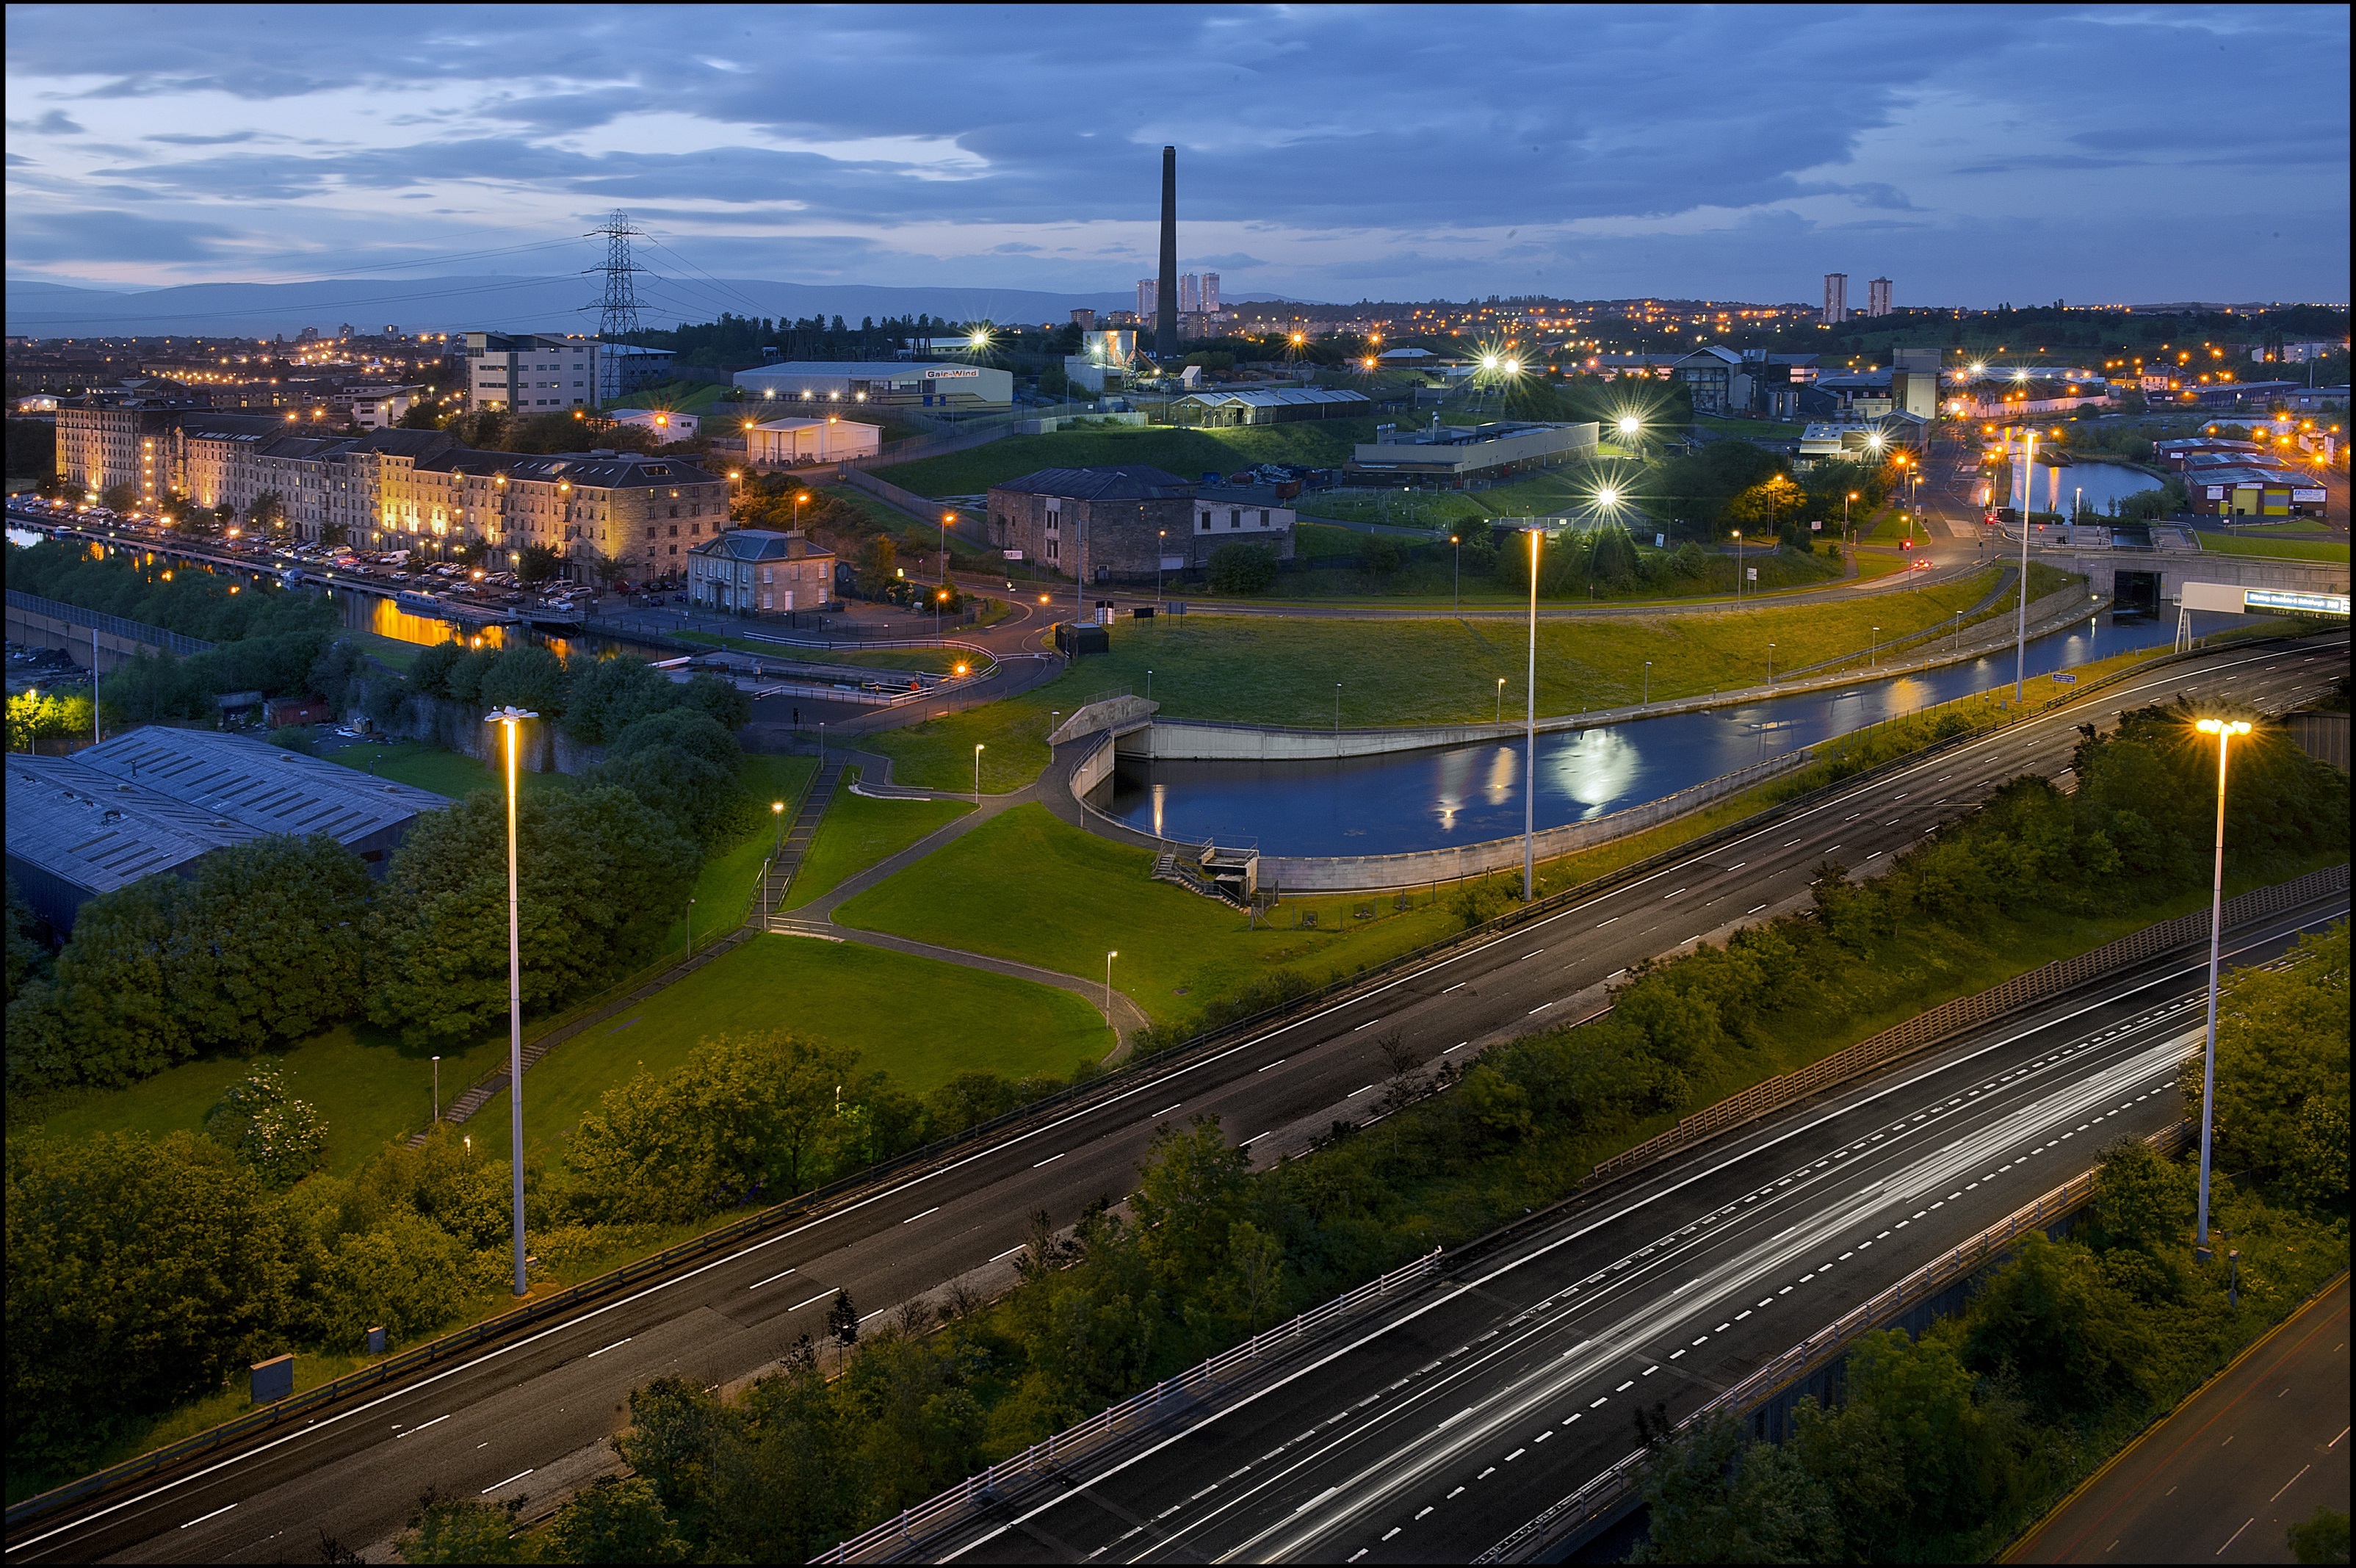 More than £300m of funding agreed for Glasgow City Region infrastructure works